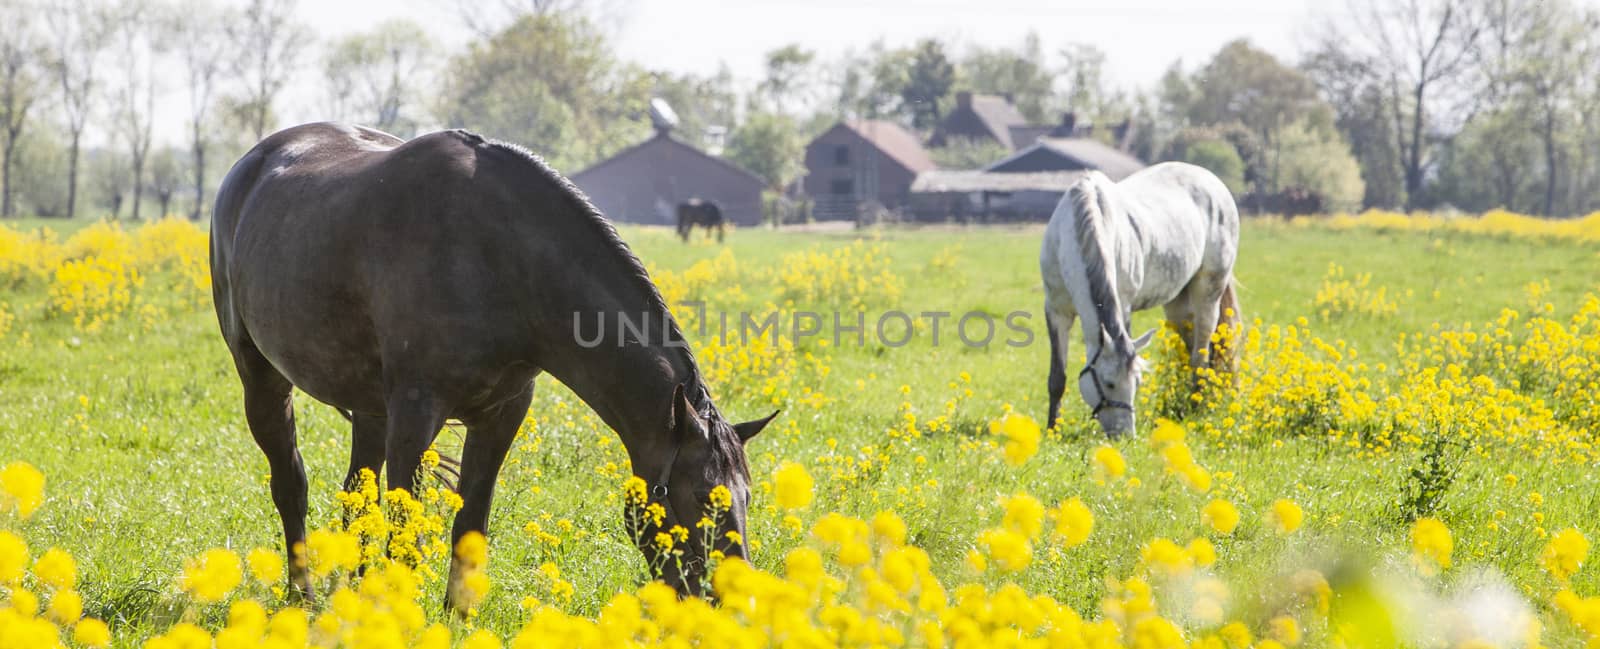 several horses grazing in green meadow with yellow rapeseed flowers and farm in the background in the netherlands